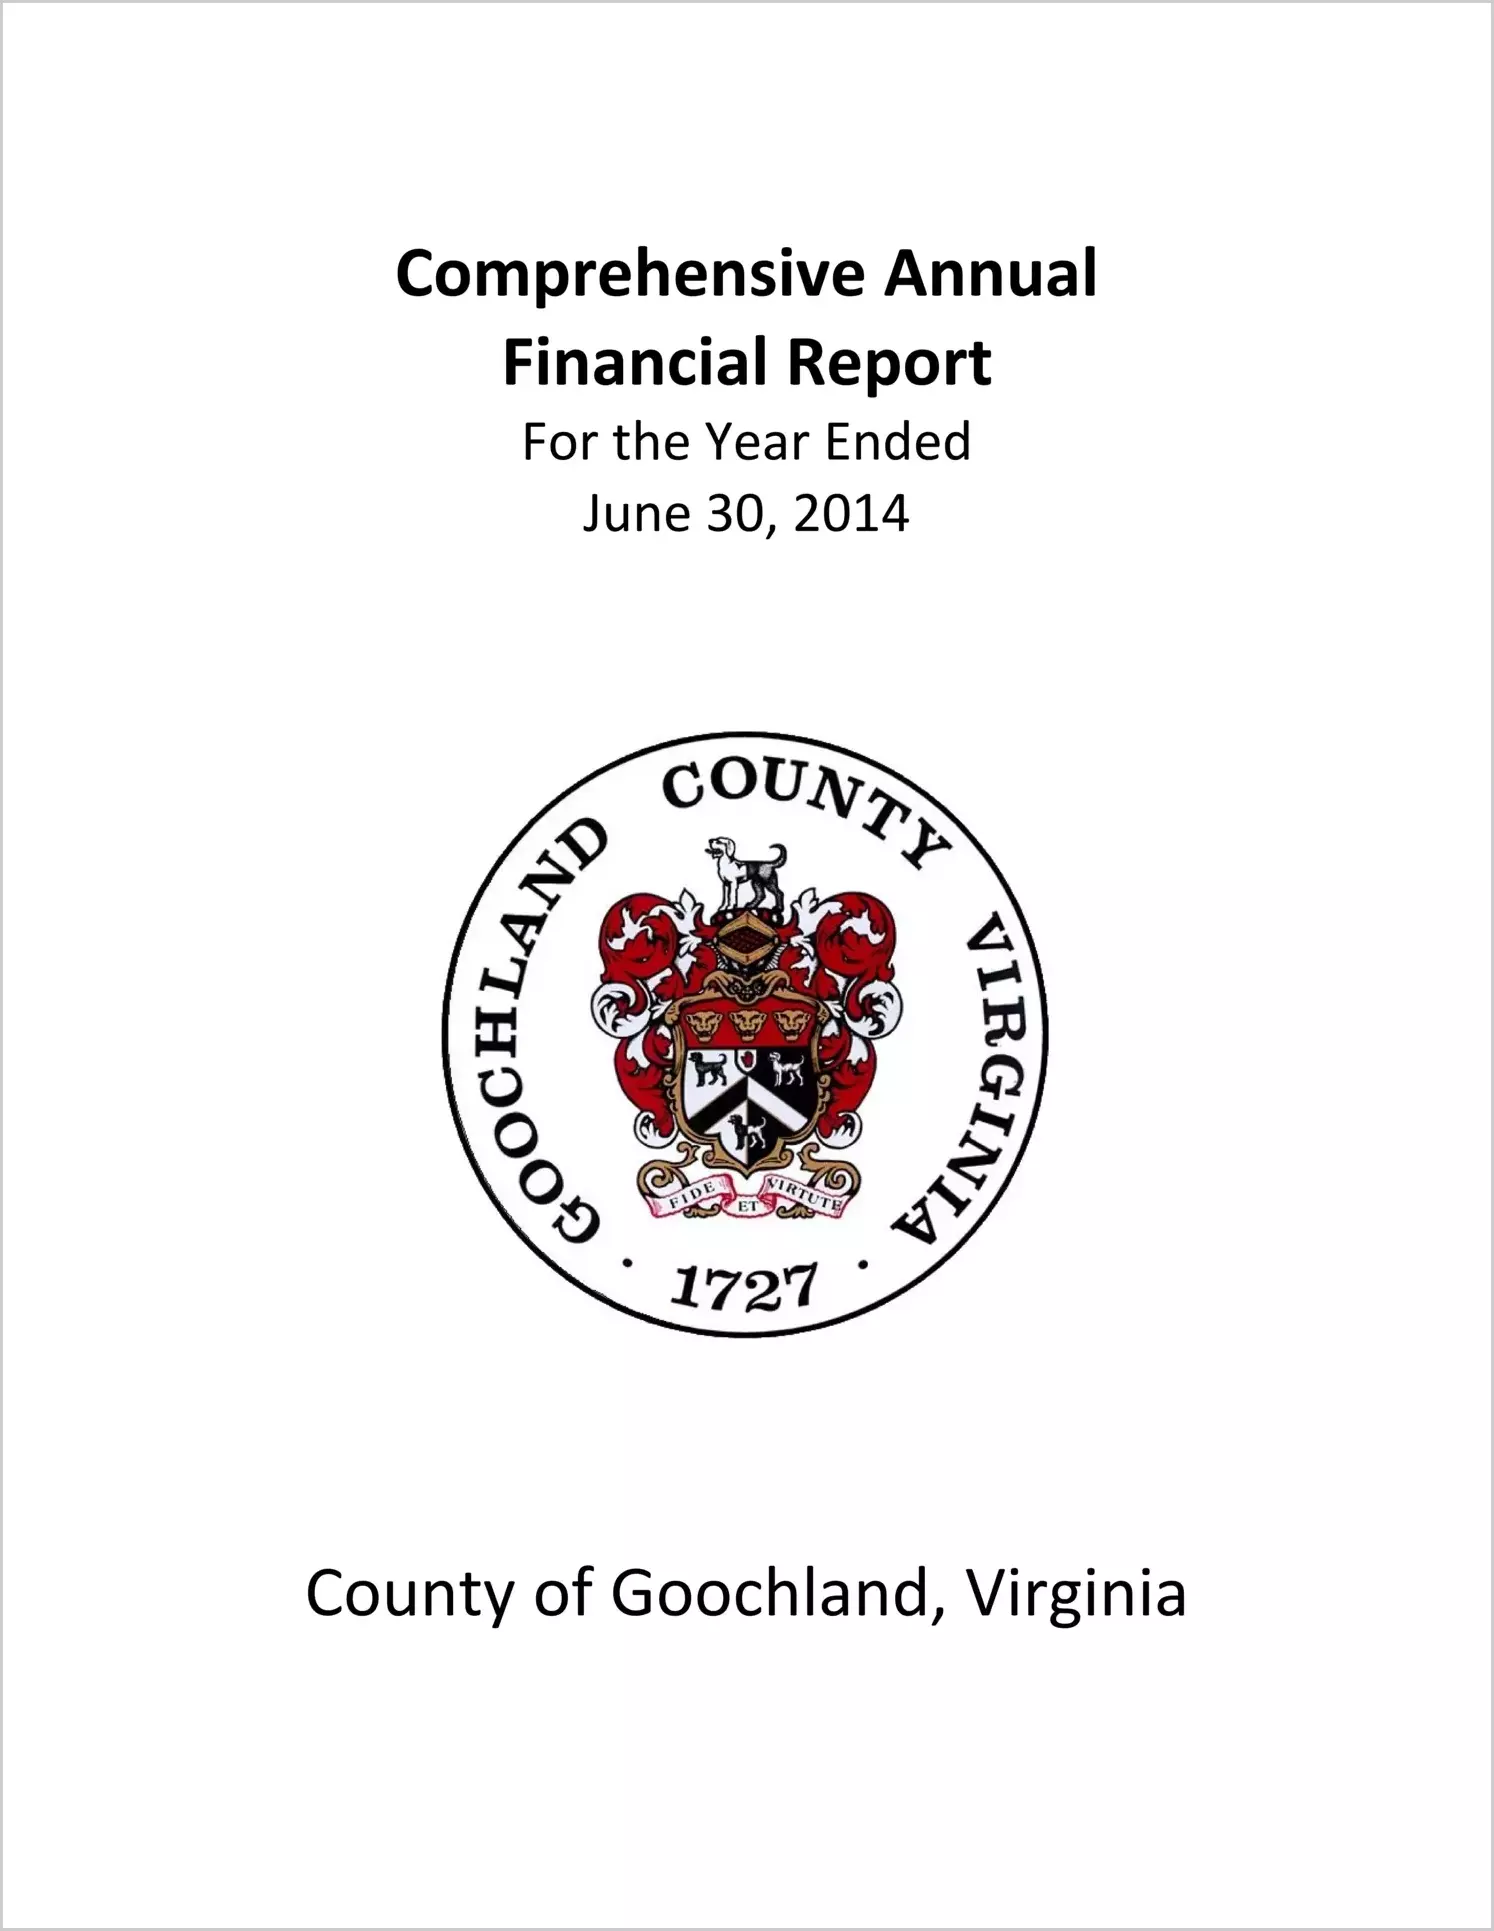 2014 Annual Financial Report for County of Goochland